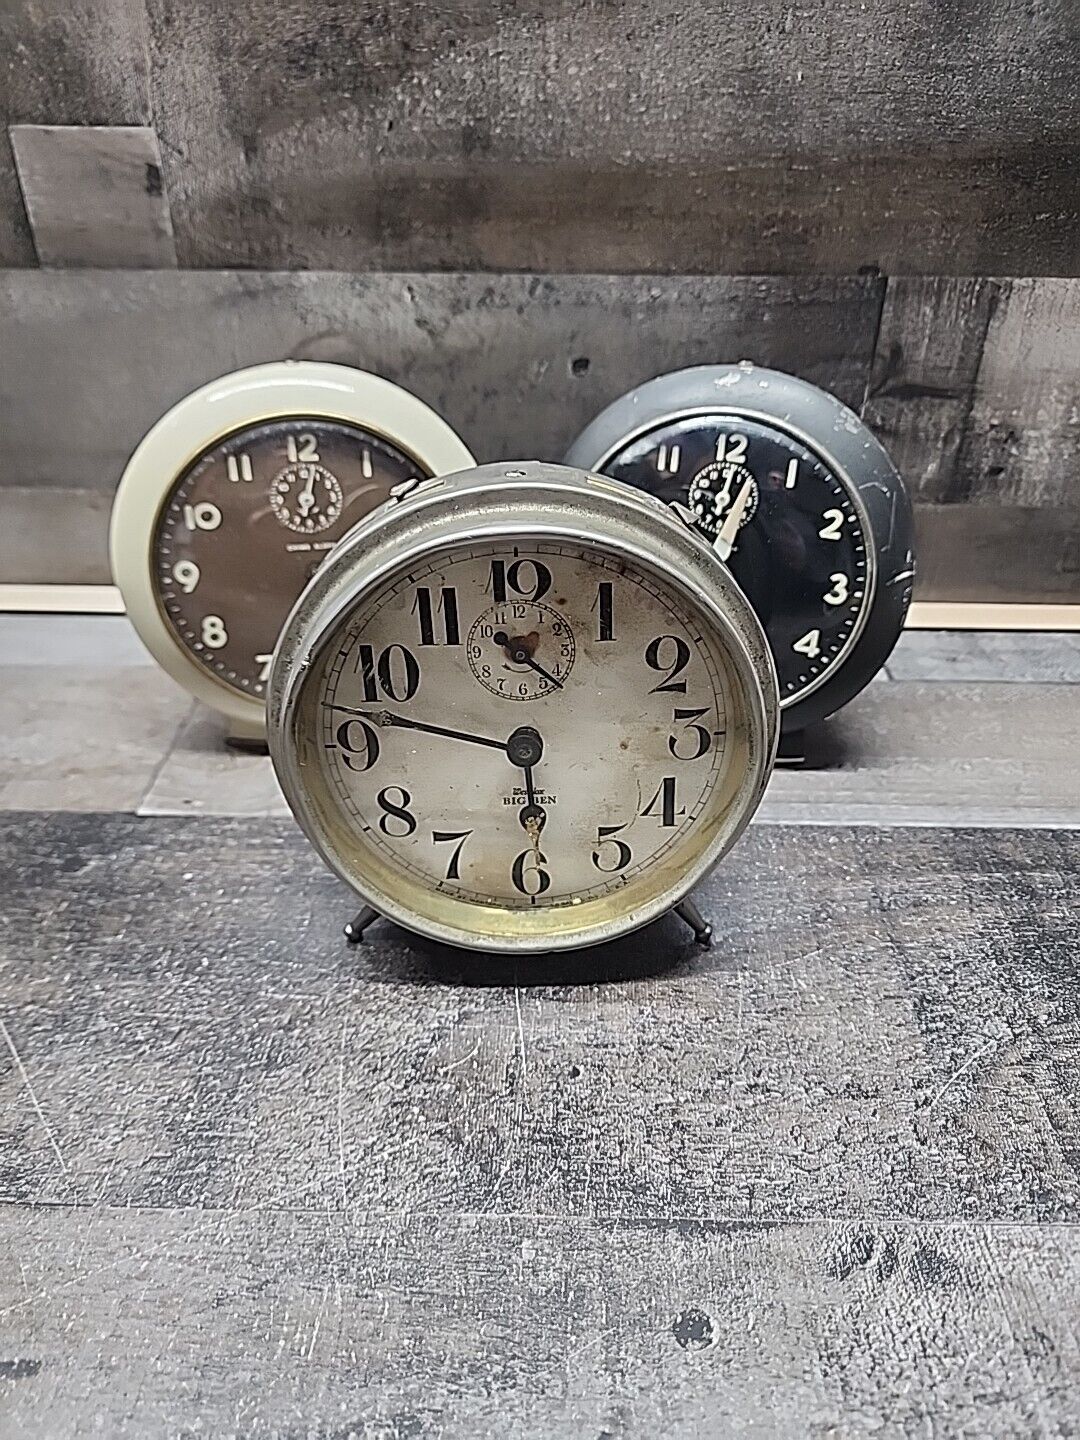 Vintage Big Ben Westclox Alarm Clocks Not Working With Glass And Keys For Parts